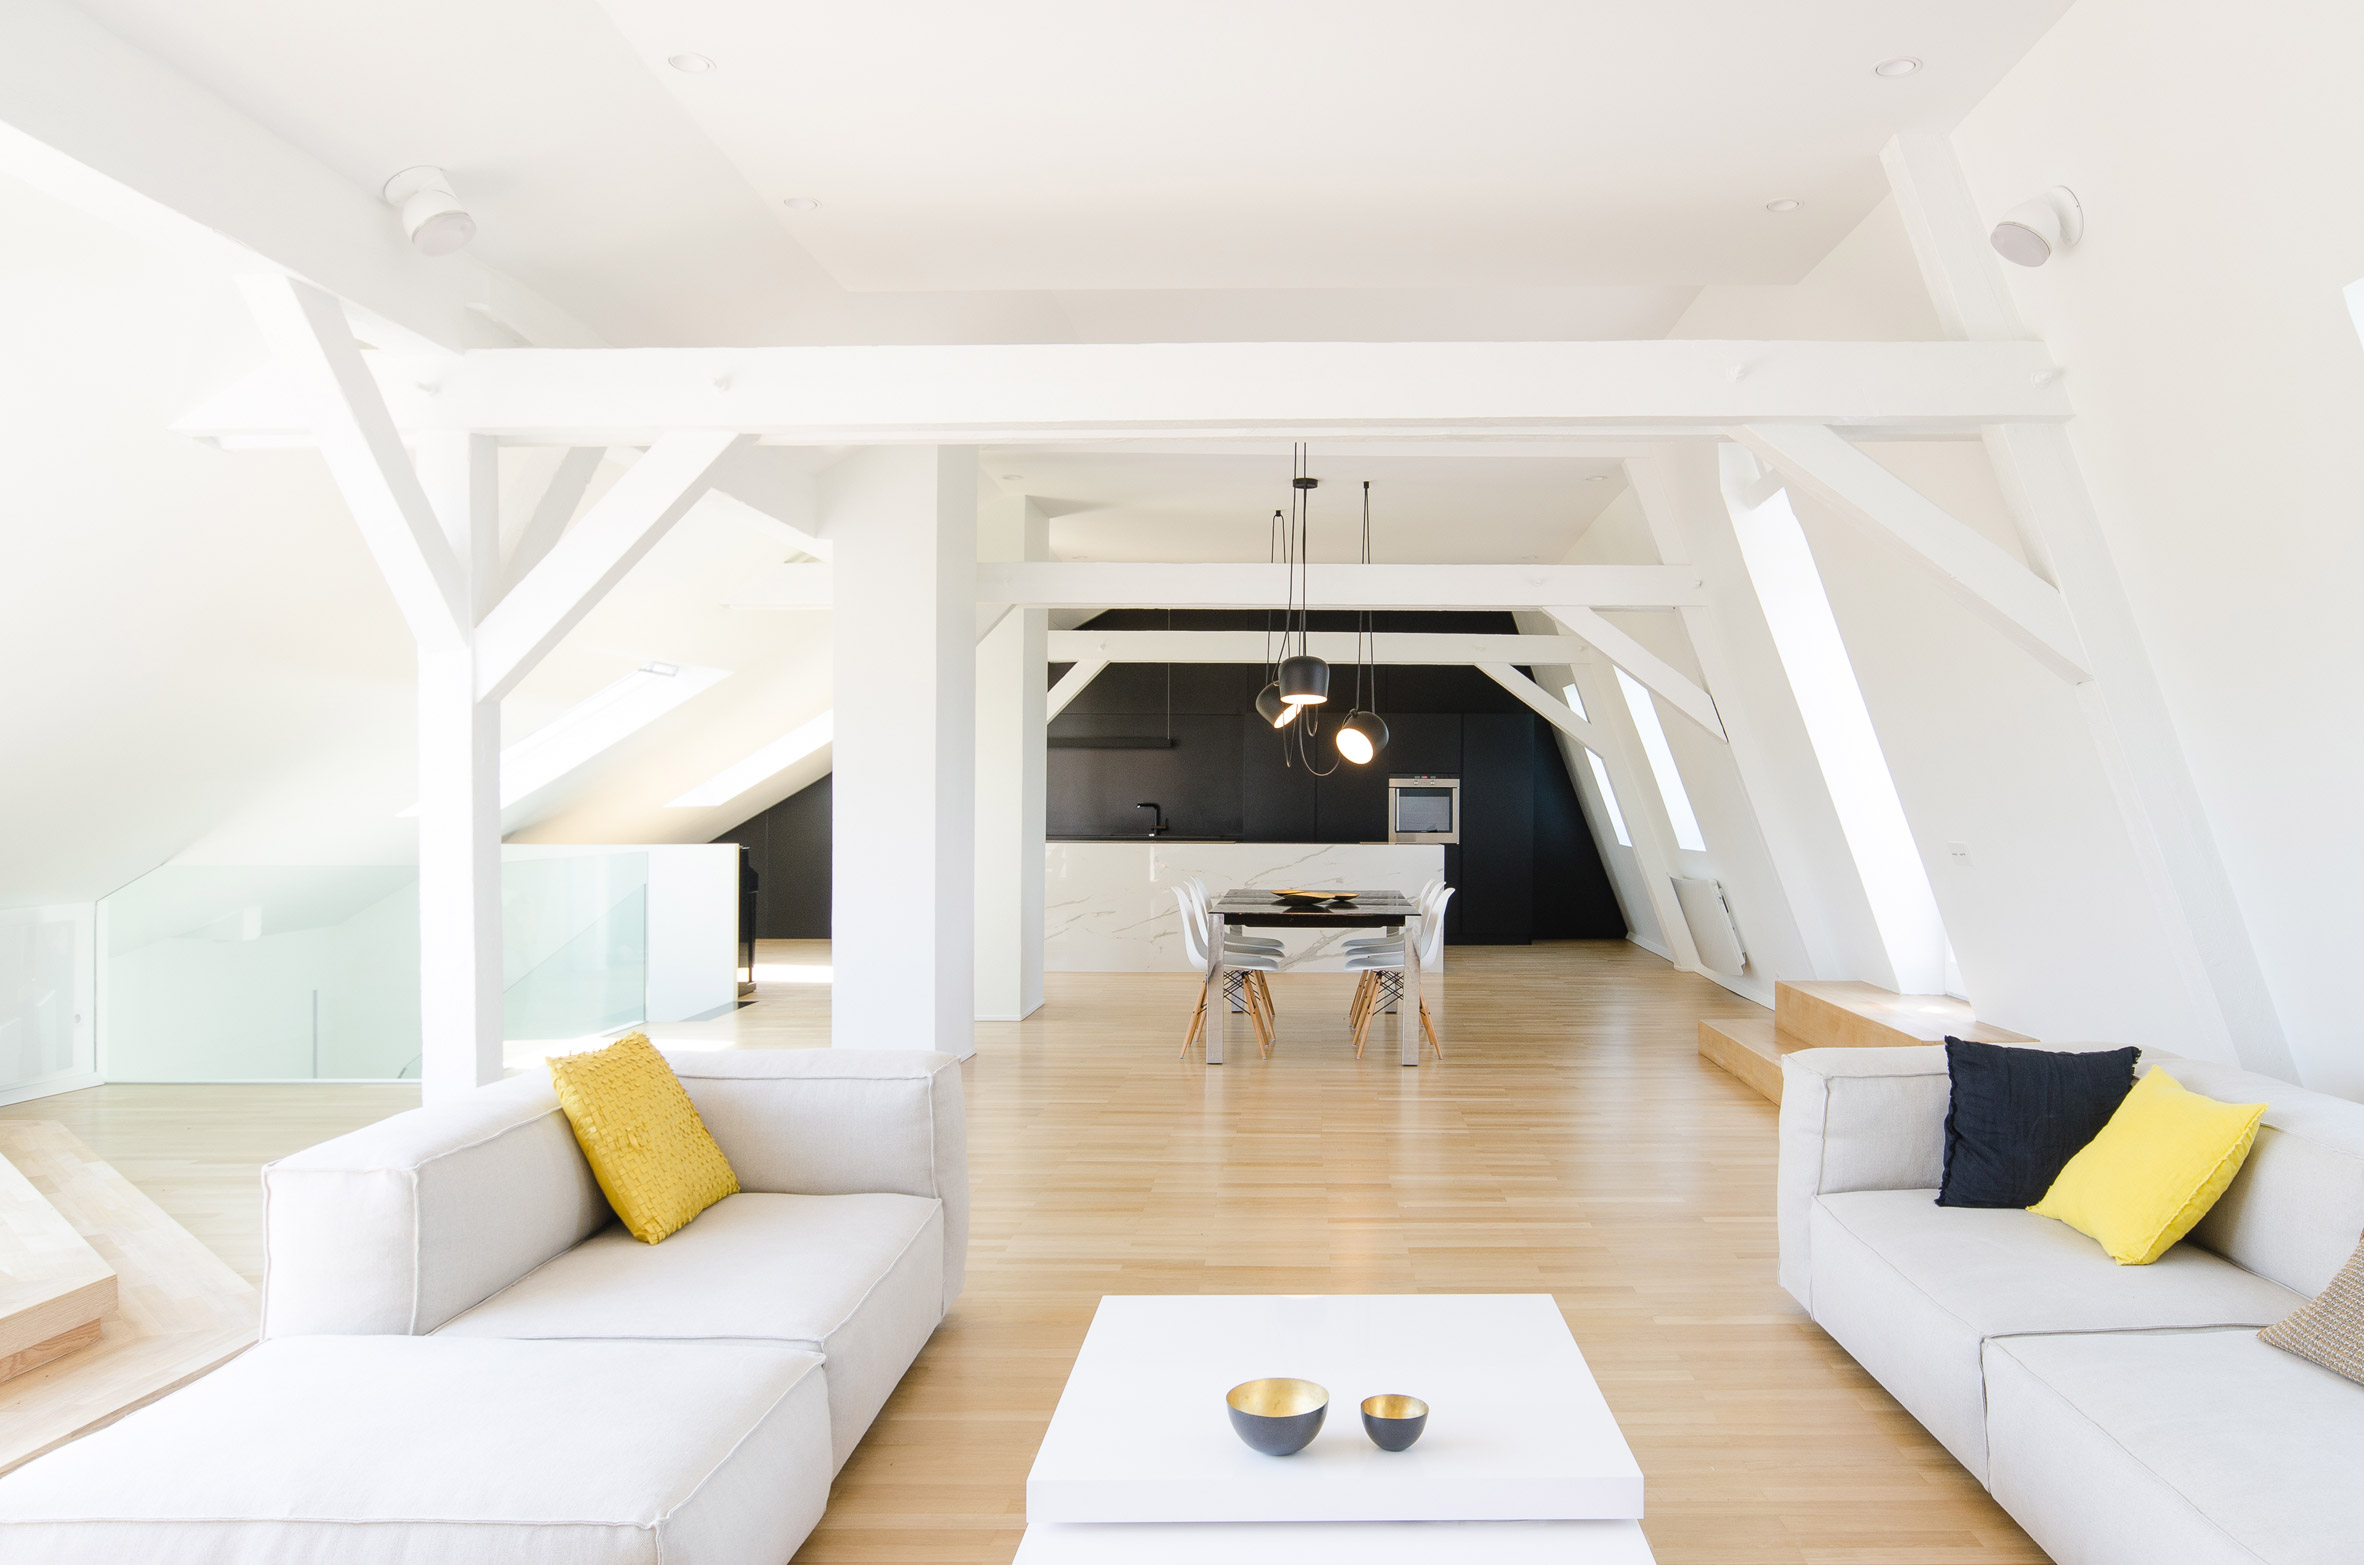 f+f architectes converts attic into bright and spacious two-storey apartment